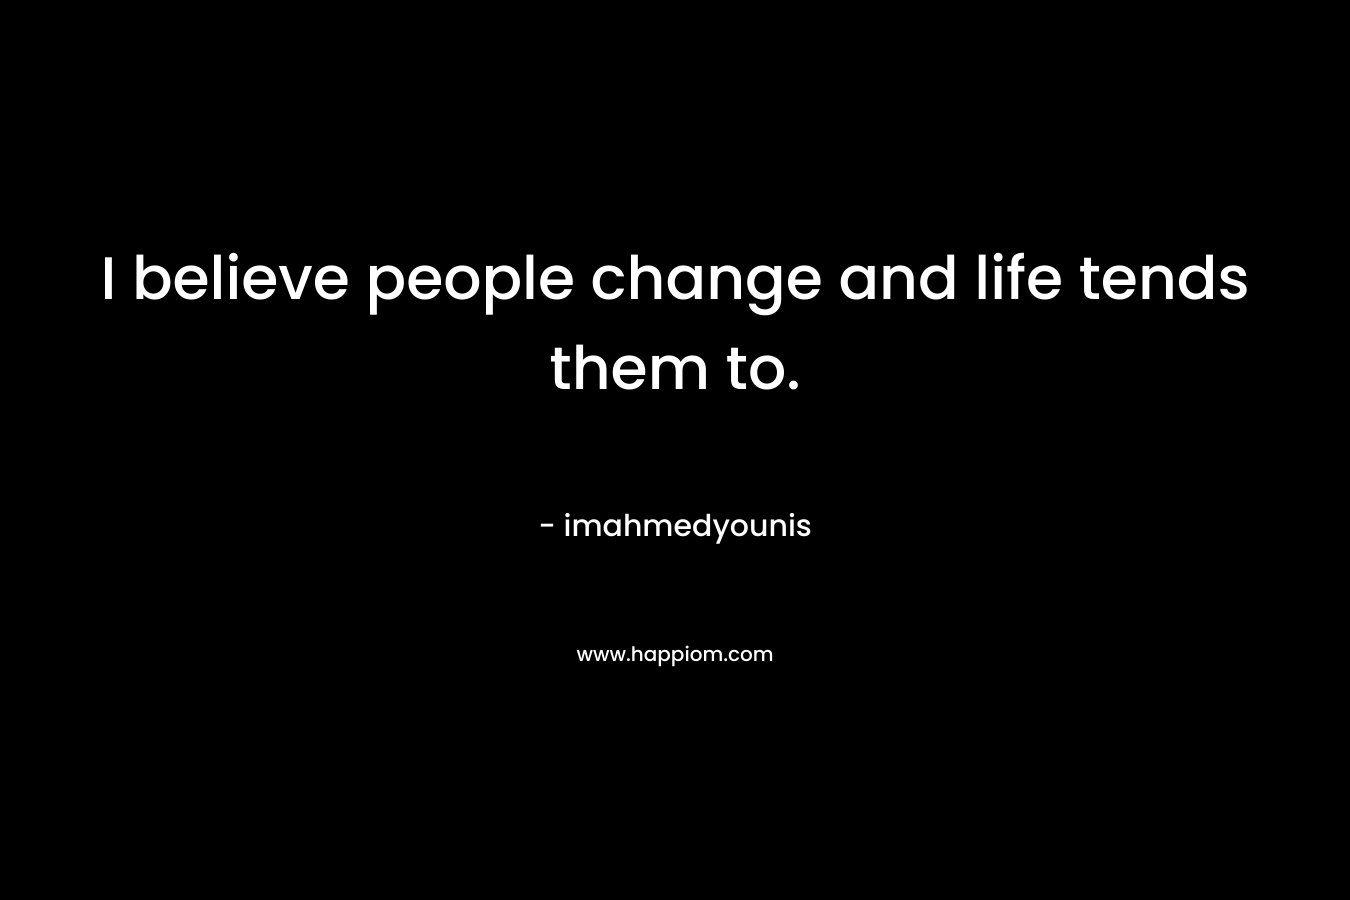 I believe people change and life tends them to.